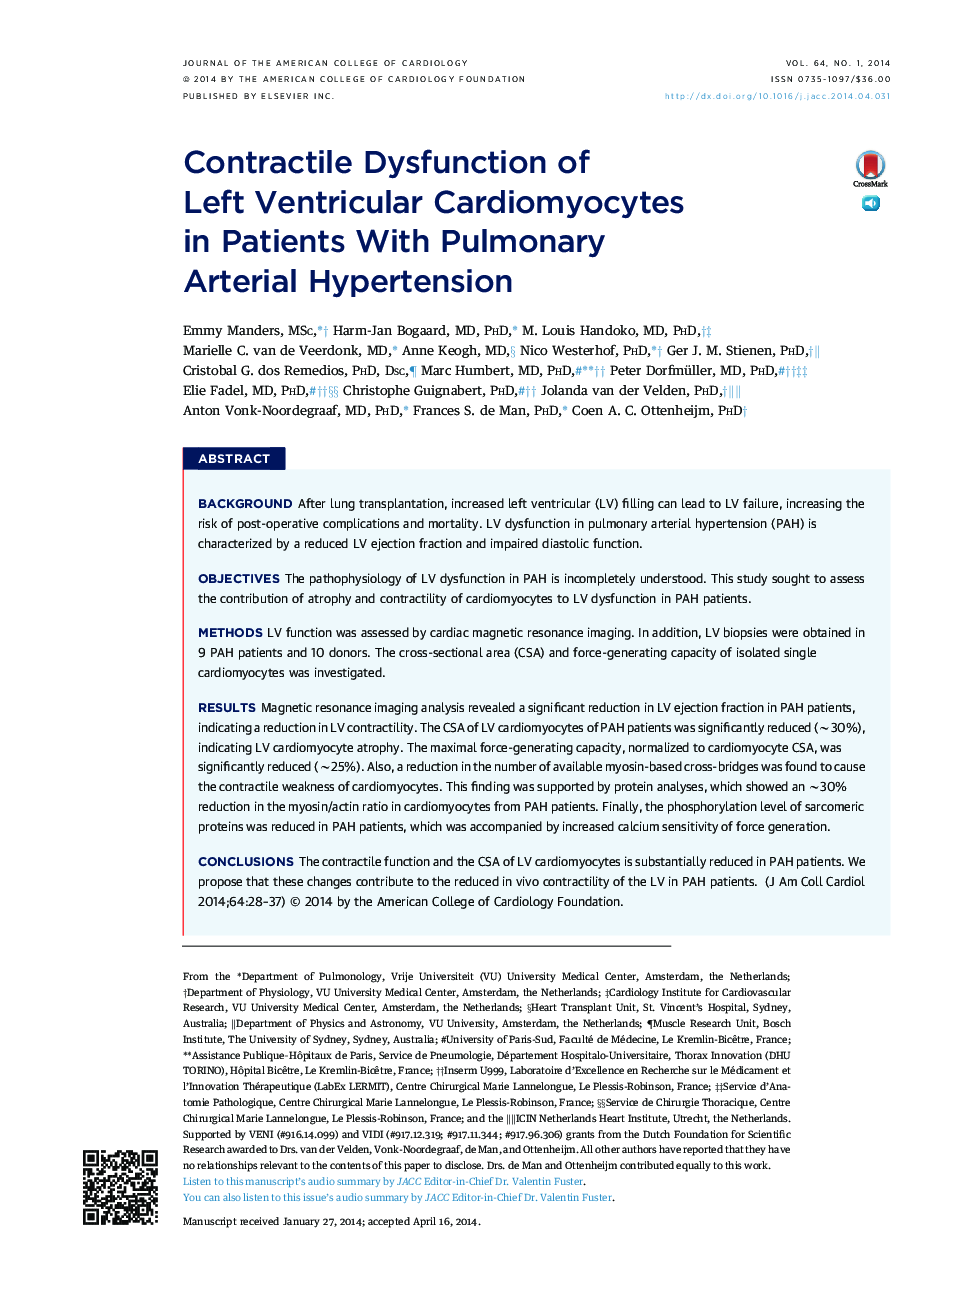 Contractile Dysfunction of Left Ventricular Cardiomyocytes in Patients With Pulmonary Arterial Hypertension